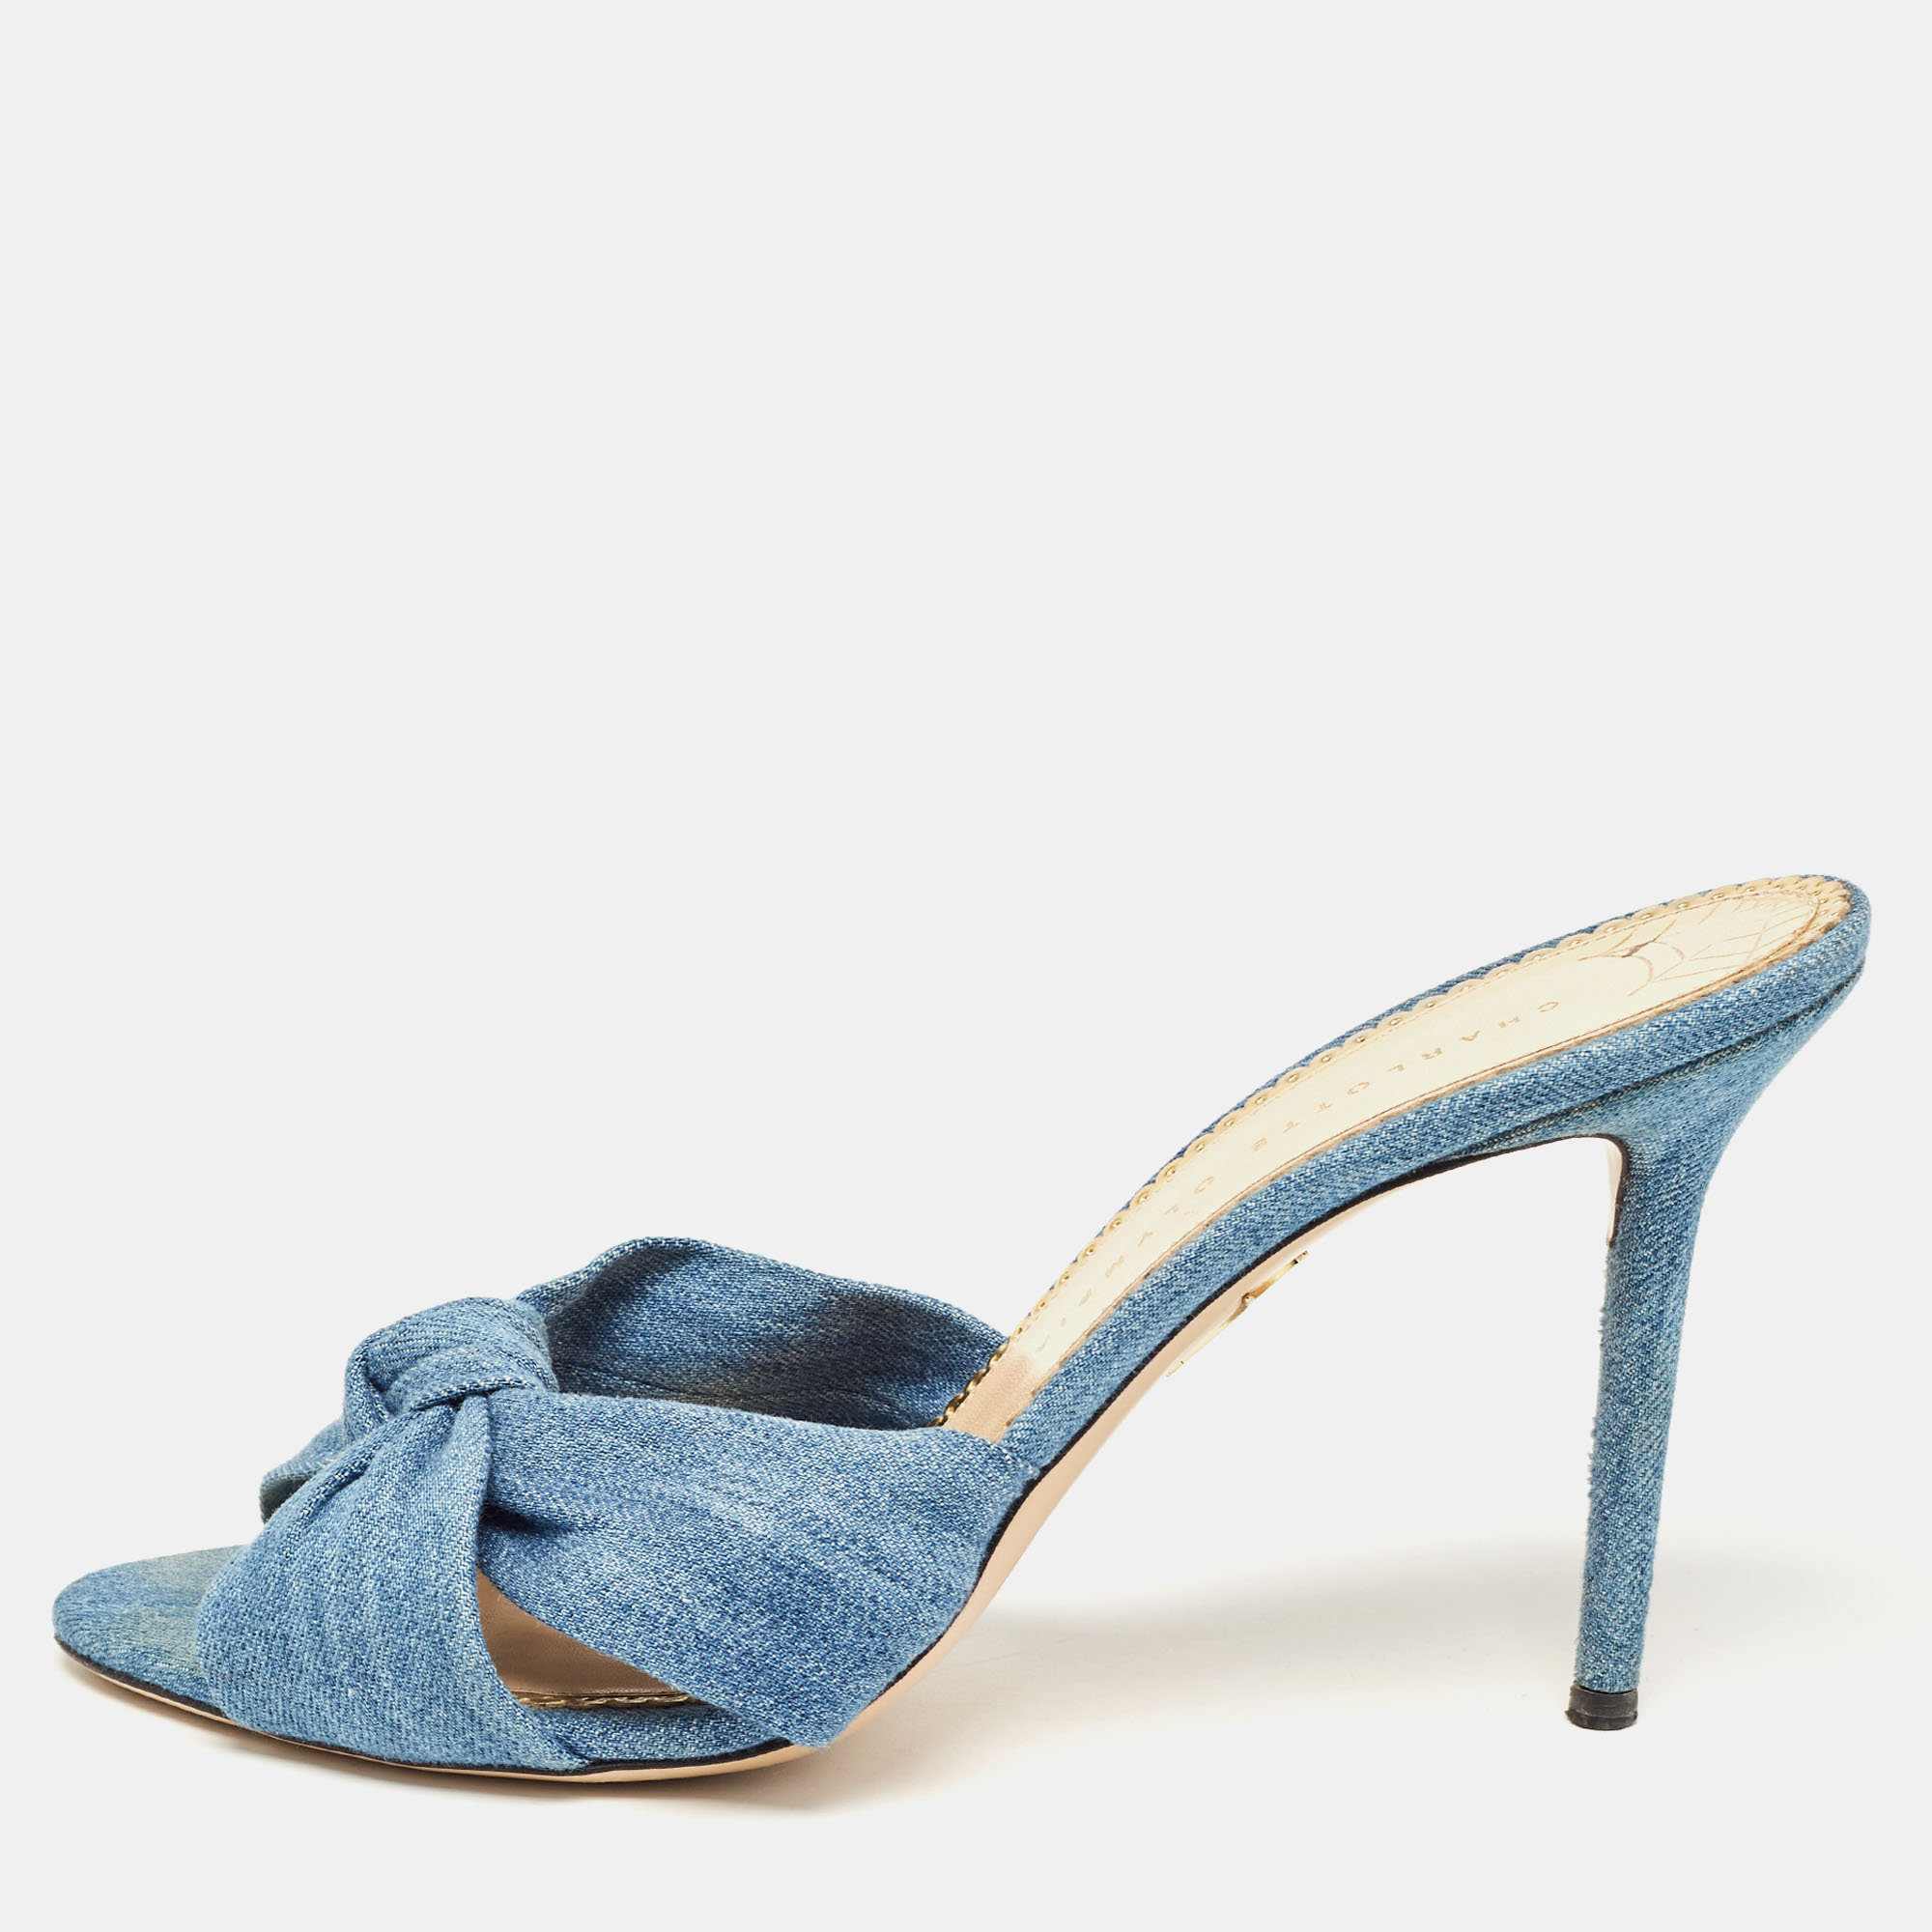 Charlotte olympia blue demin knotted slides size 41